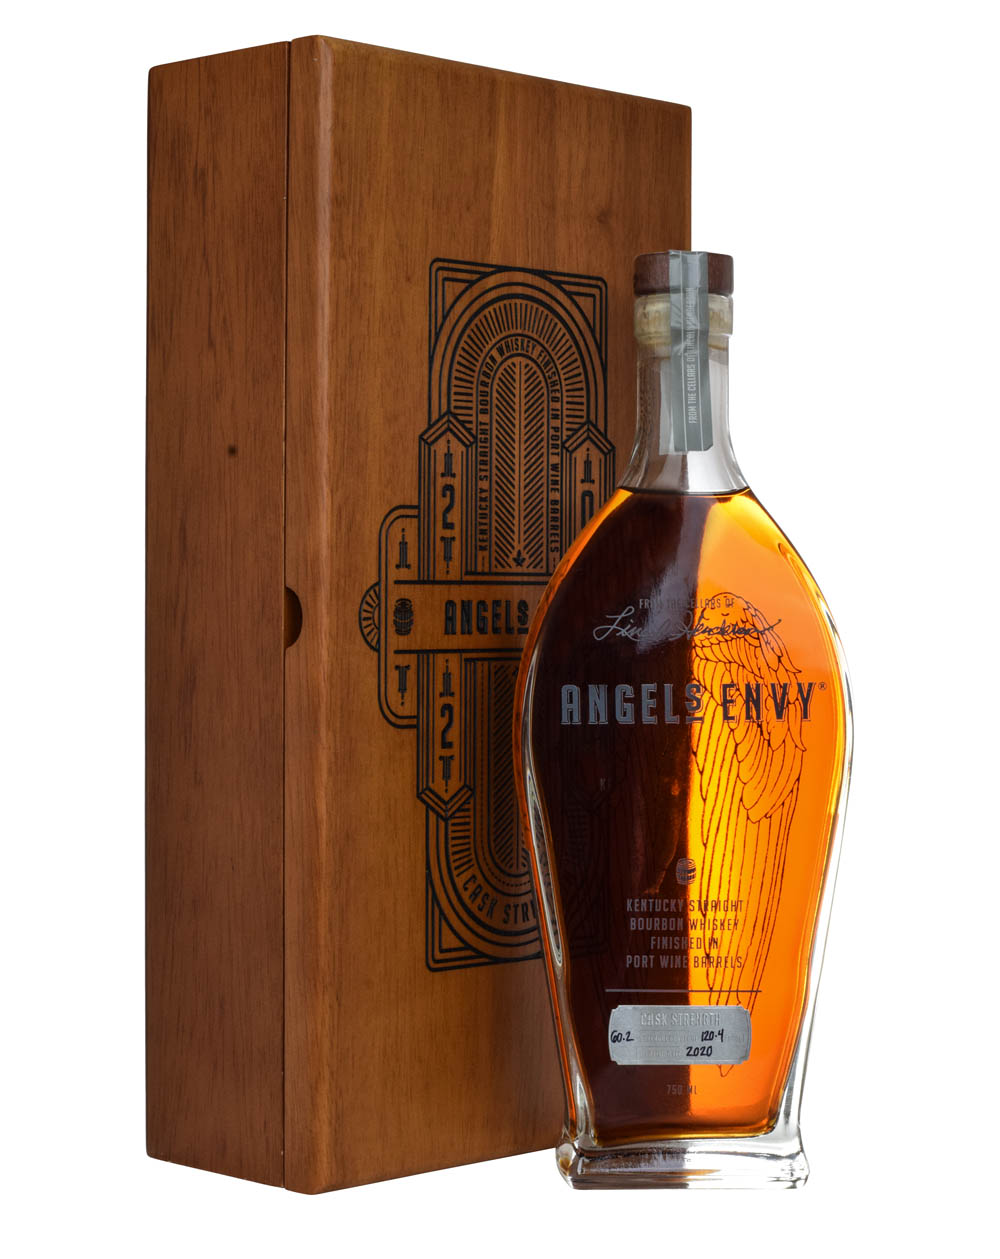 Angel's Envy 2020 Port Wine Finish Cask Strength Box Musthave Malts MHM